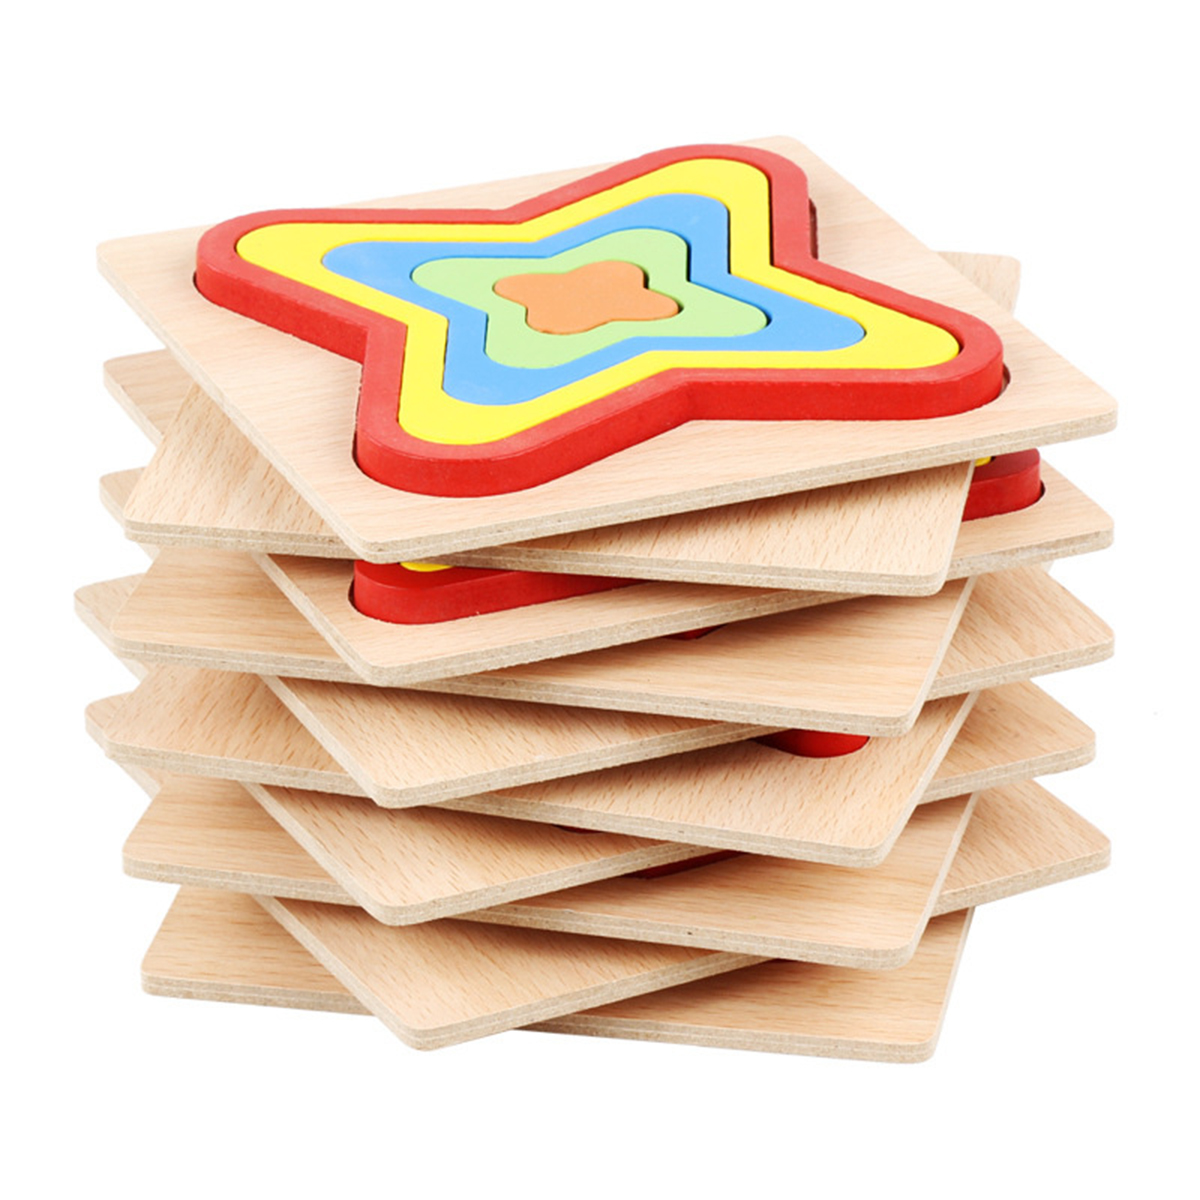 Shape Cognition Board Geometry Jigsaw Puzzle Wooden Kids Educational Learning Toys 18